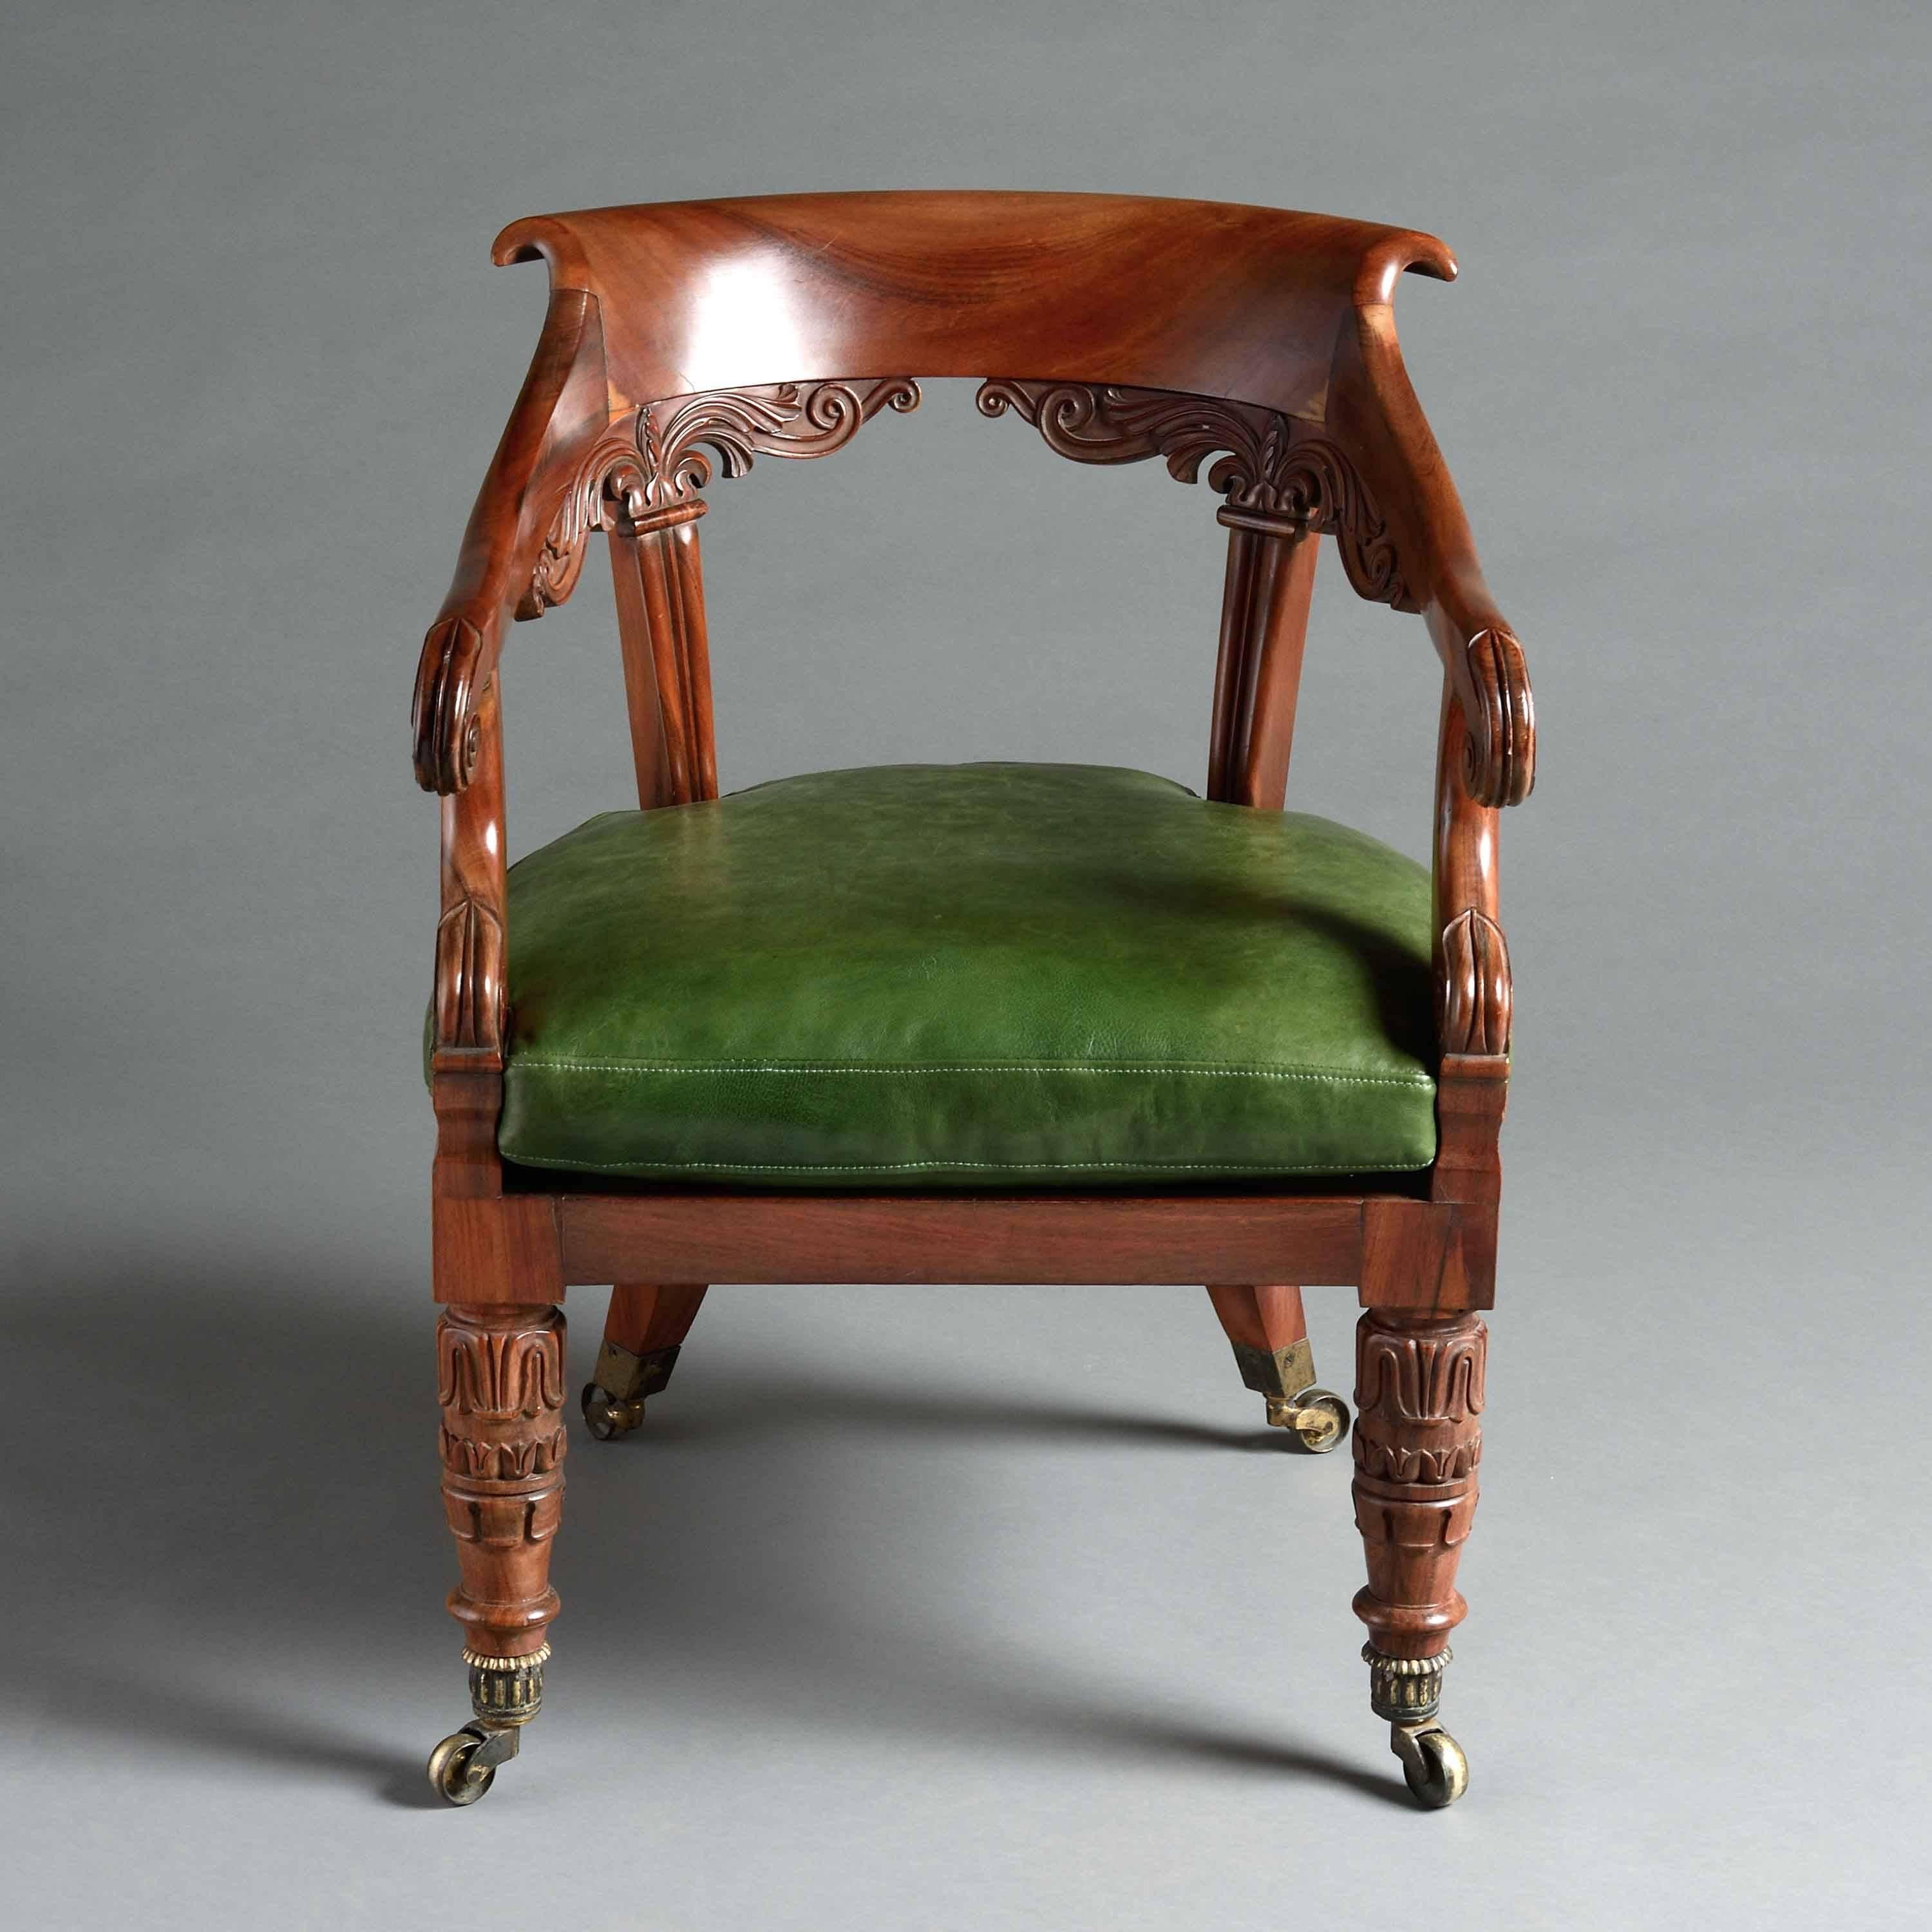 A George IV Goncalo Alves armchair attributed to Gillows, circa 1825.

Carved with lotus leaves and scrolls with curved scroll-over top rail, the original seat squab re-upholstered in green Morocco leather, the legs with original ribbed socket